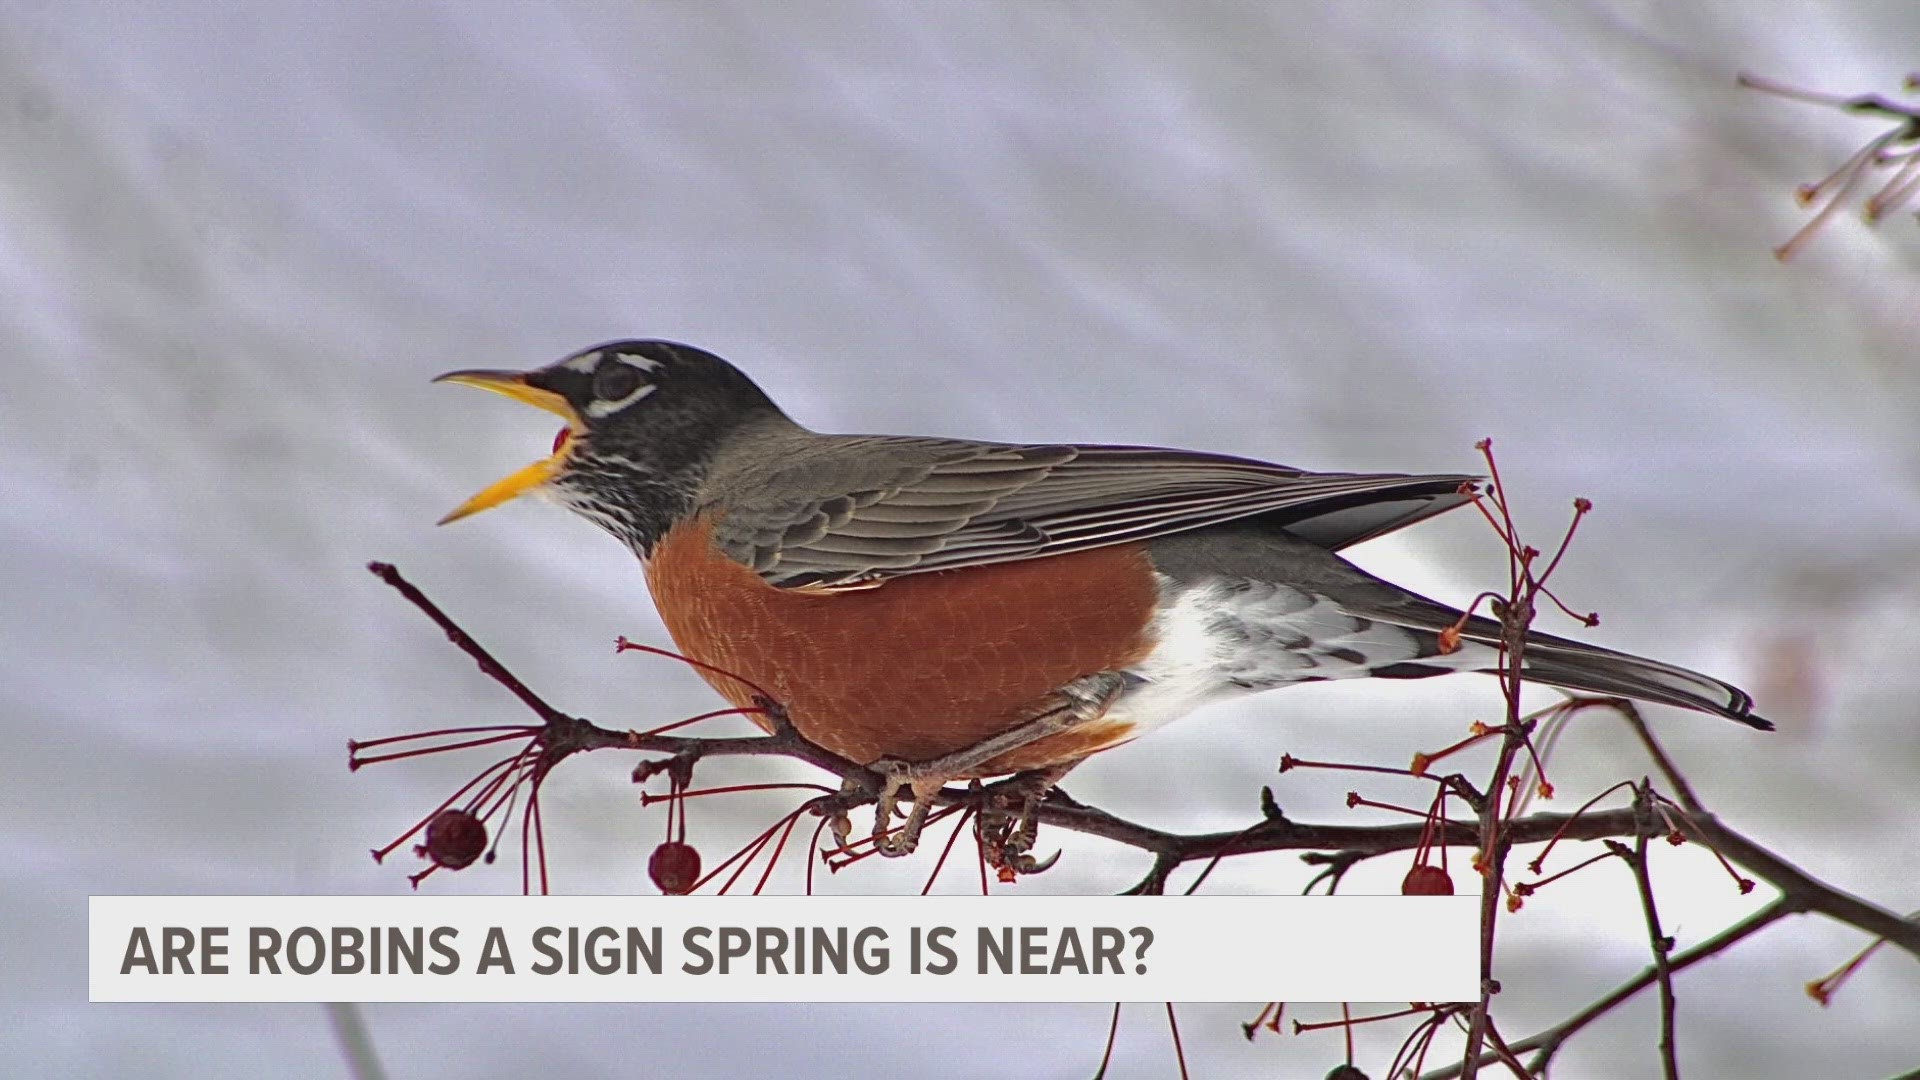 Many people think of the American Robin as the sign that spring is here. But seeing a robin in the winter doesn't necessarily mean the weather is about to warm.